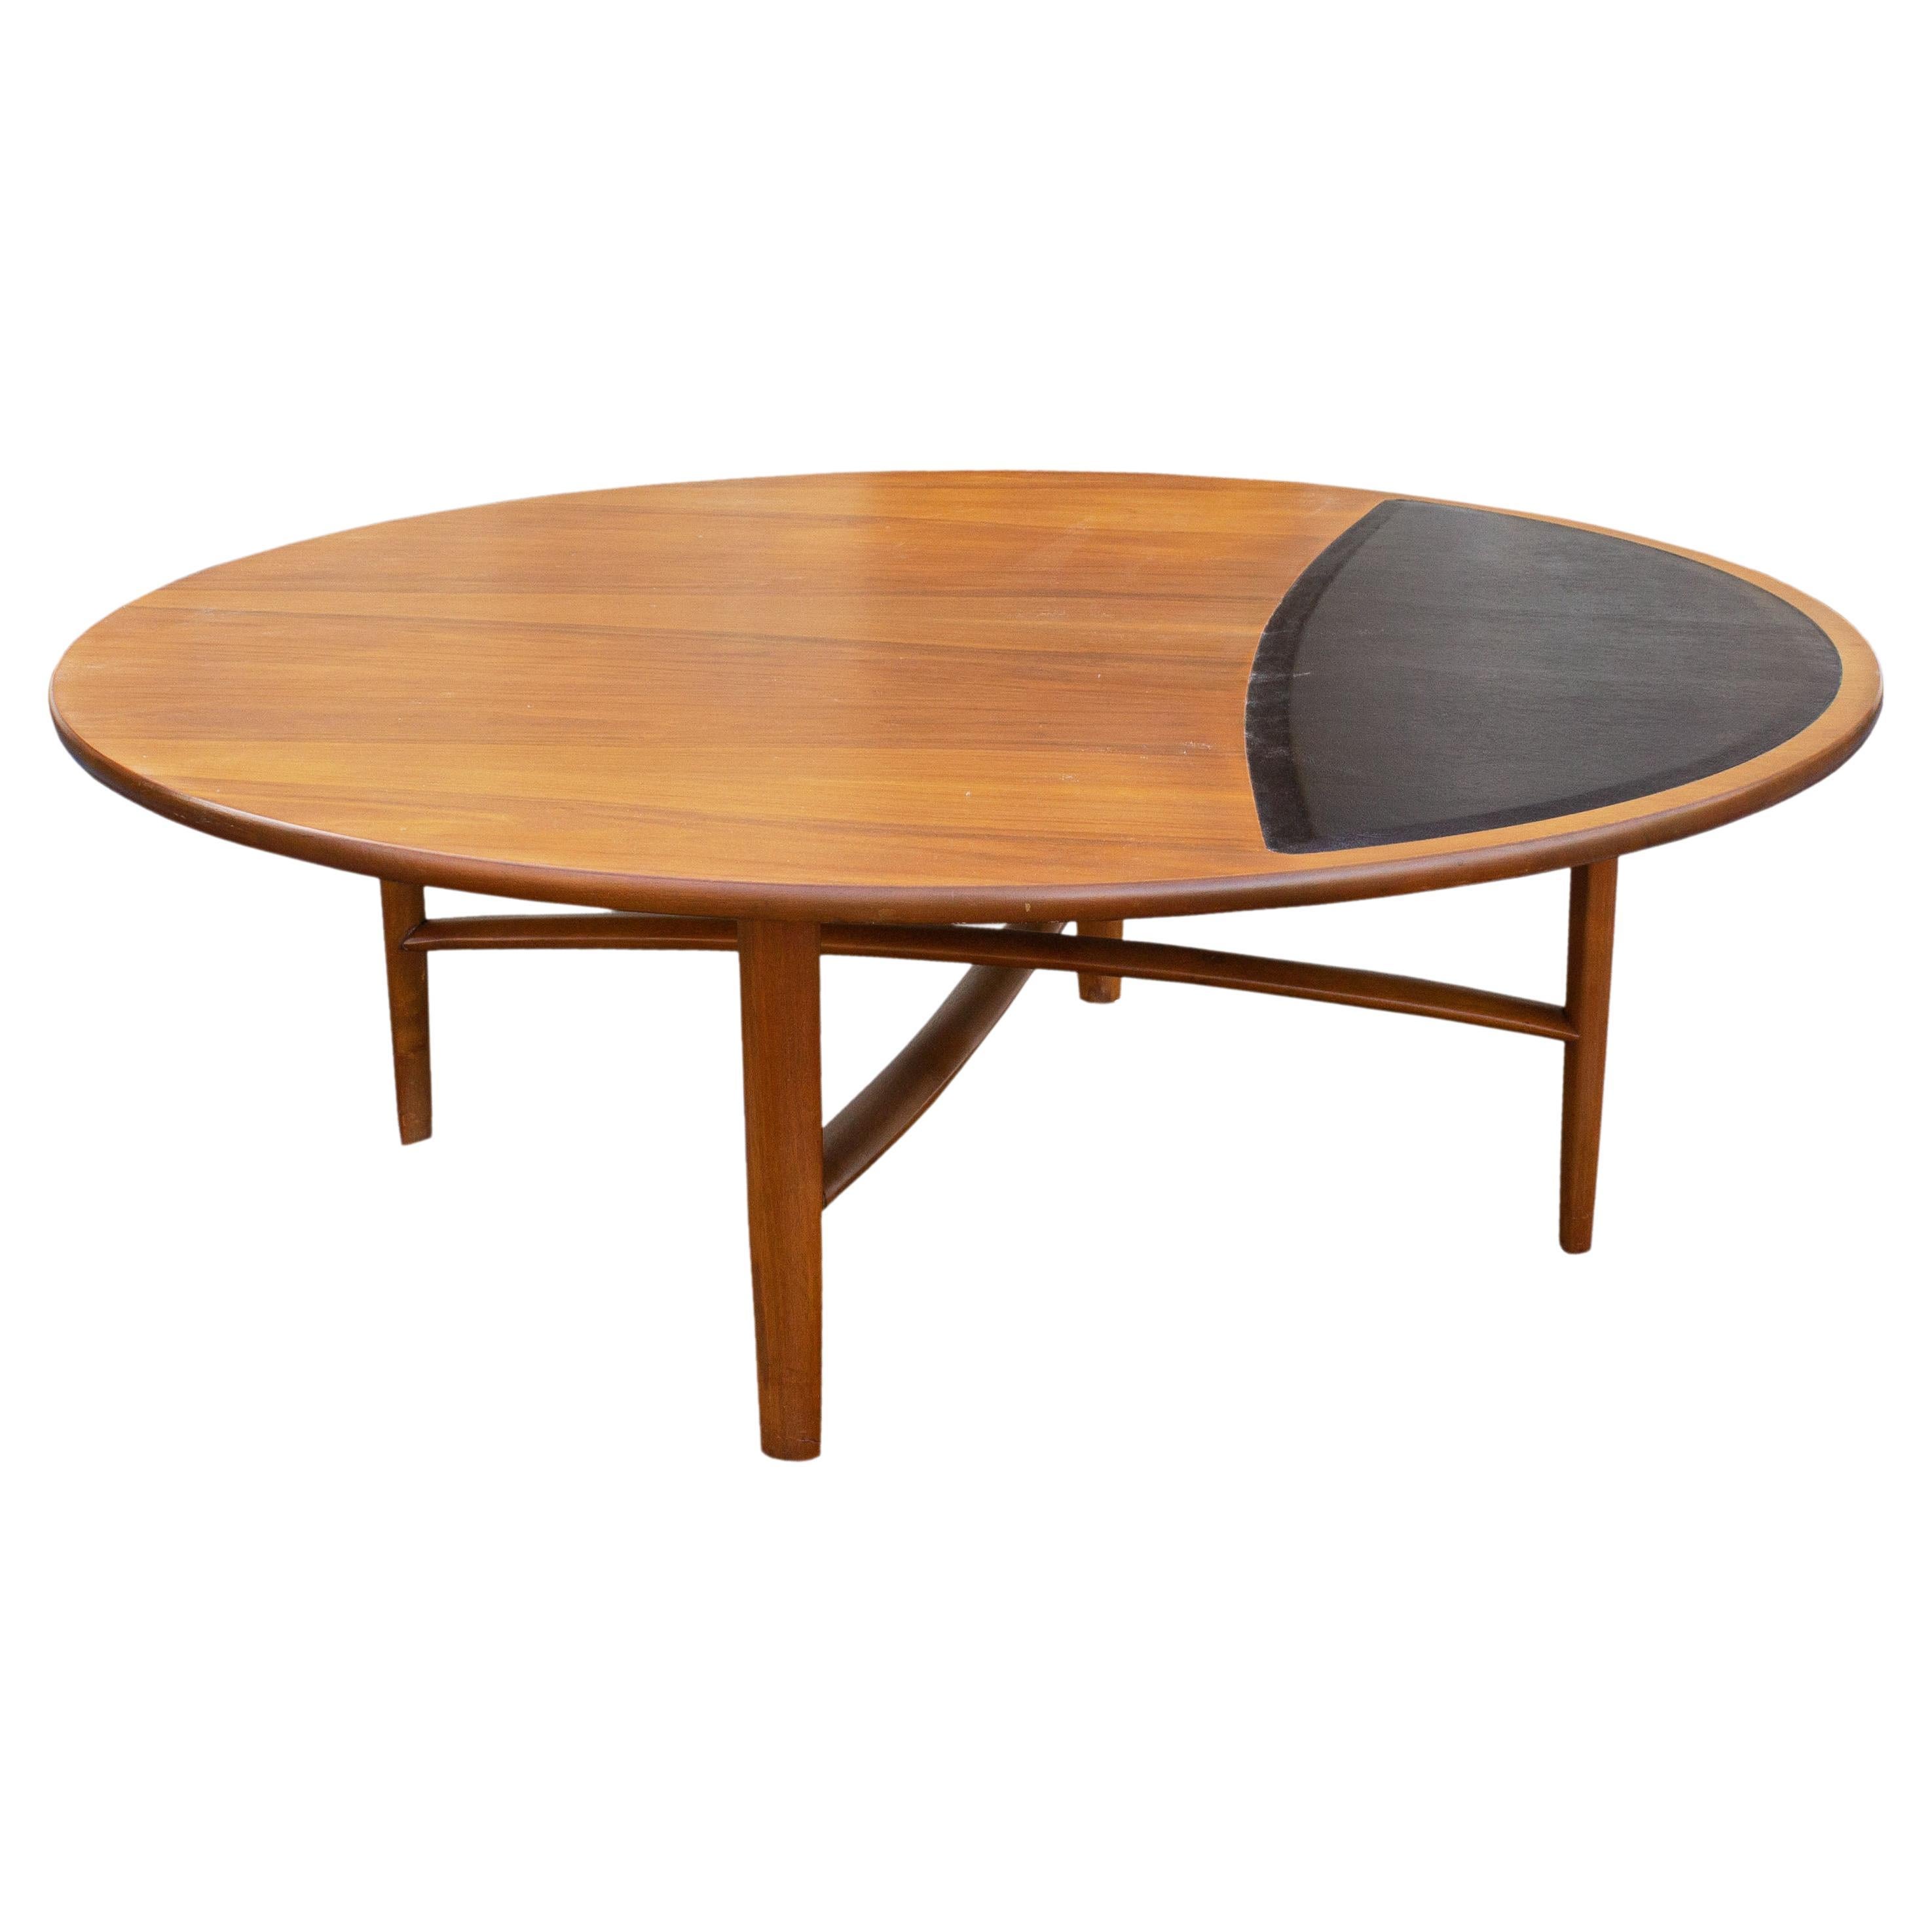 Barney Flagg Drexel “Parallel” Coffee Walnut and Leather Table